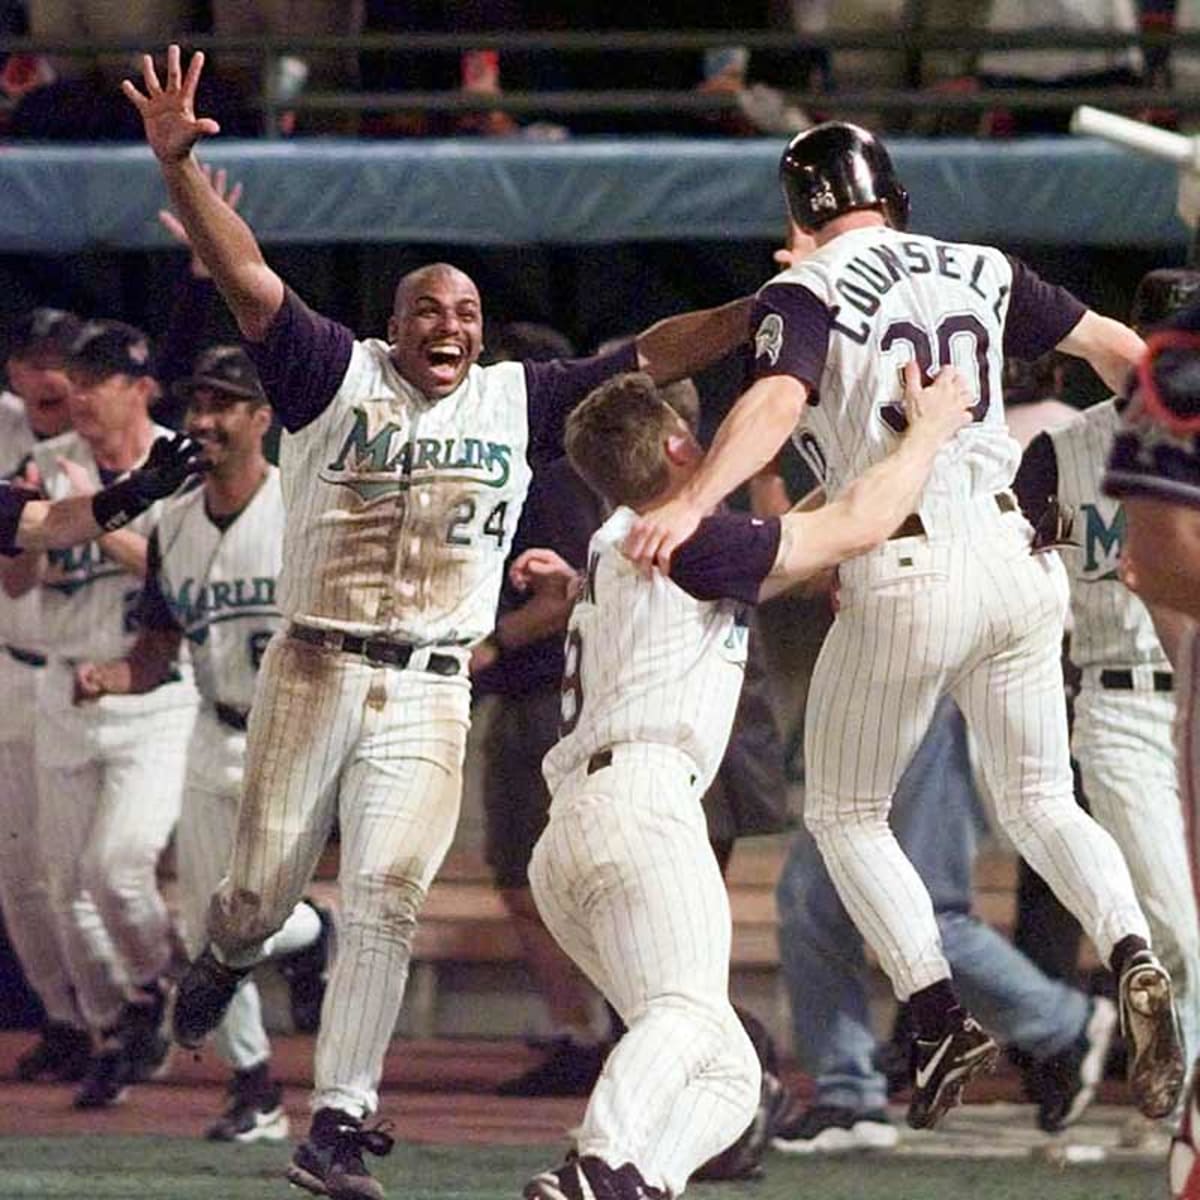 MIAMI MARLINS TO CELEBRATE THE 25TH ANNIVERSARY OF THE 1997 WORLD SERIES  DURING MAY 13-15 WEEKEND SERIES